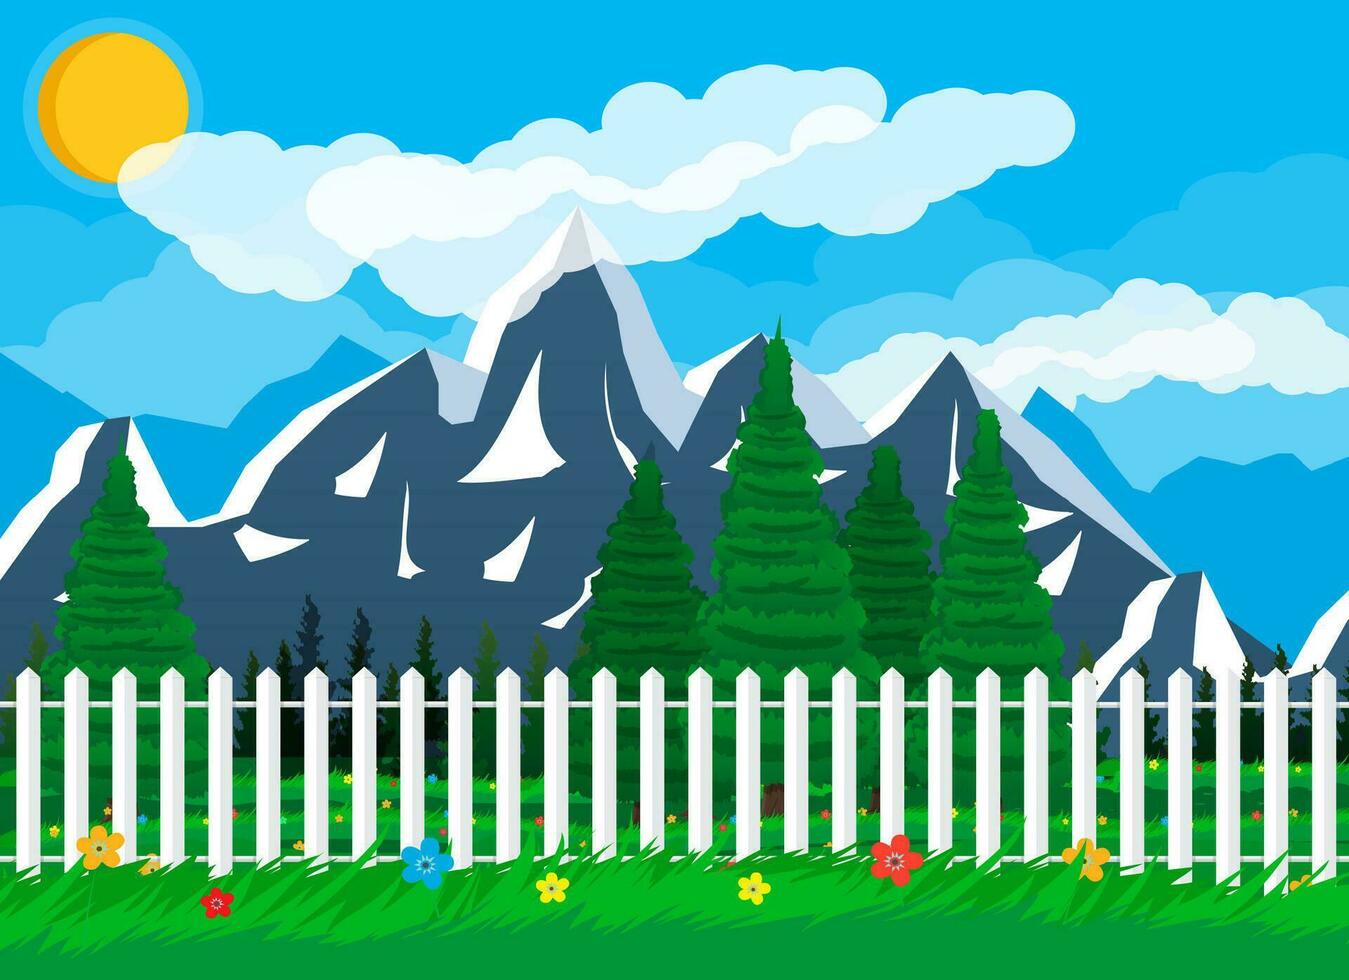 Summer nature landscape with mountains, forest, grass, flower, fence, sky, sun and clouds. National park. Vector illustration in flat style